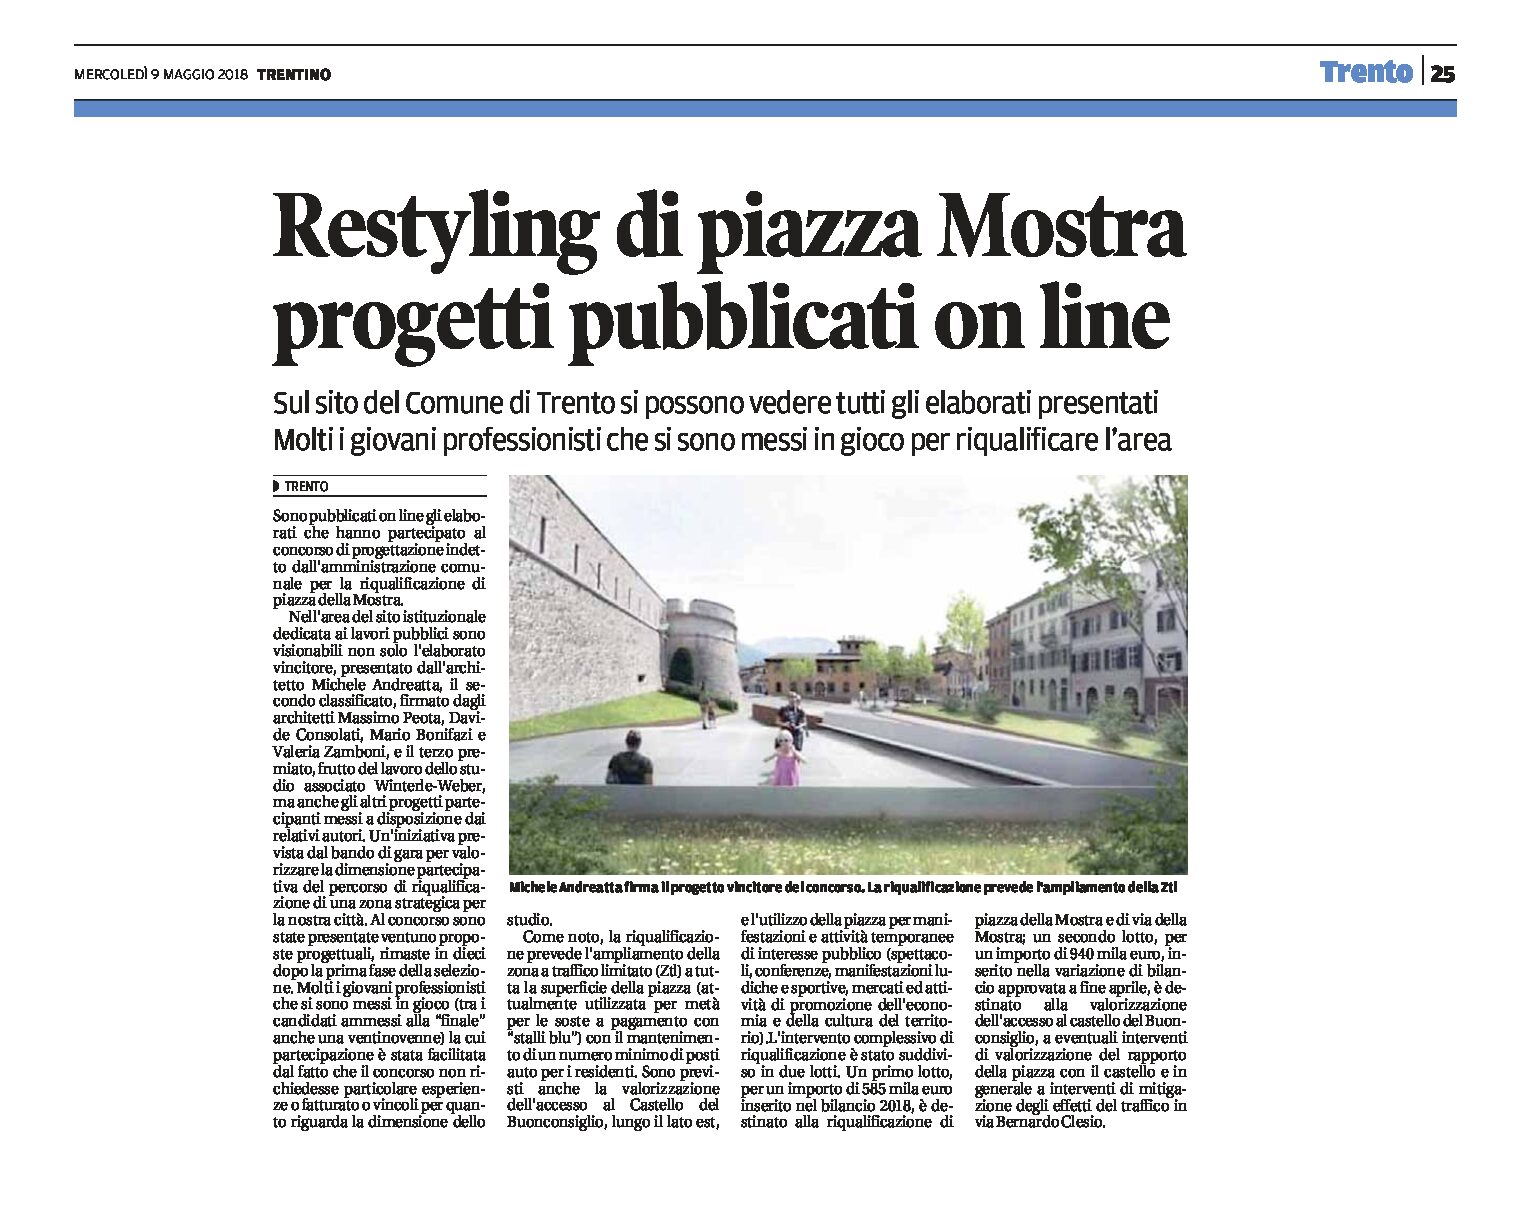 Trento, piazza Mostra: restyling. Progetti online